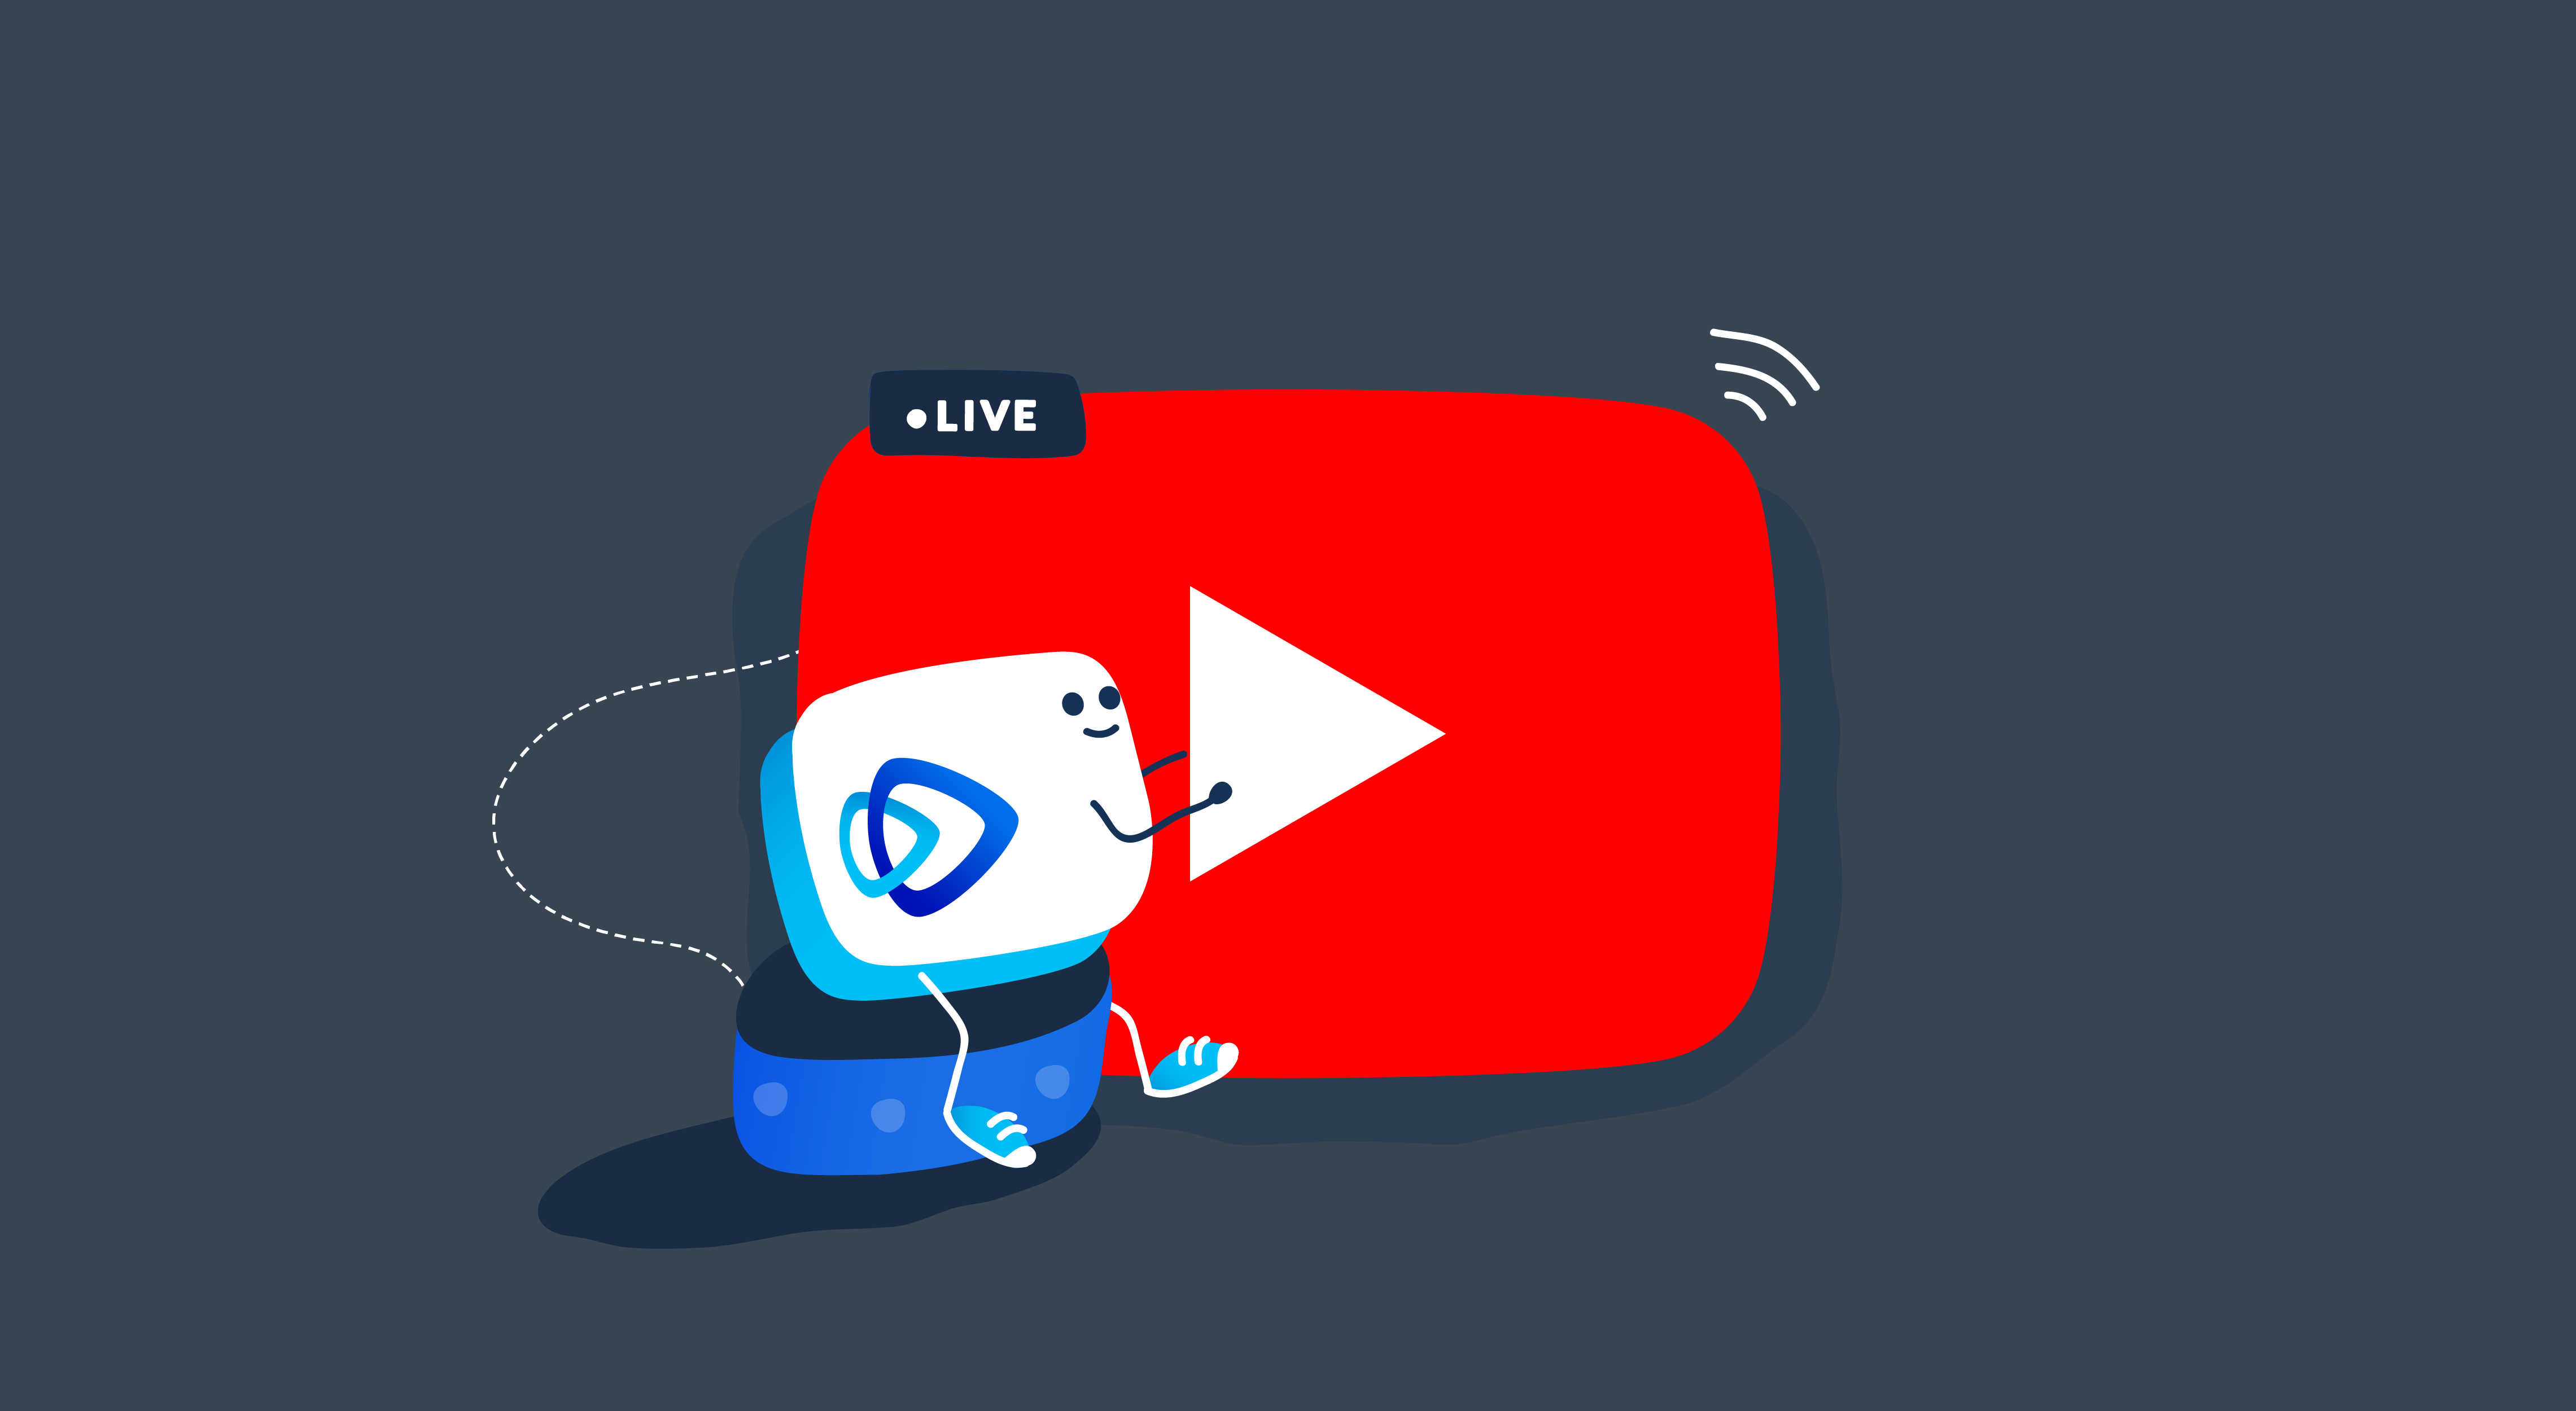 YouTube Streaming: The Algorithm and You